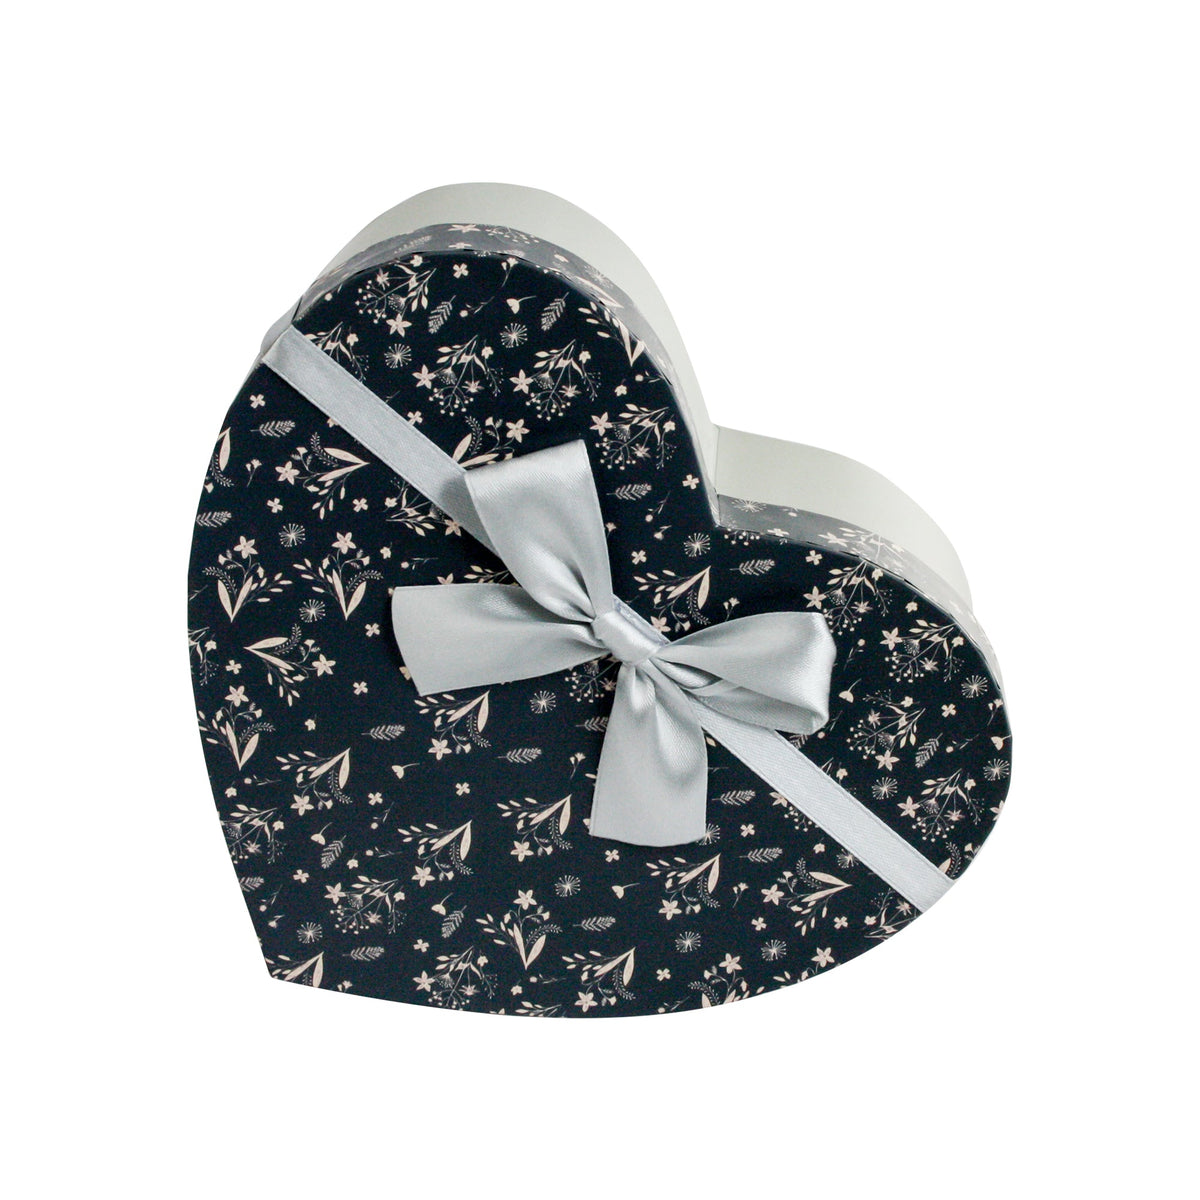 Luxury Heart Shaped Grey Floral Gift Box - Single (Sizes Available)